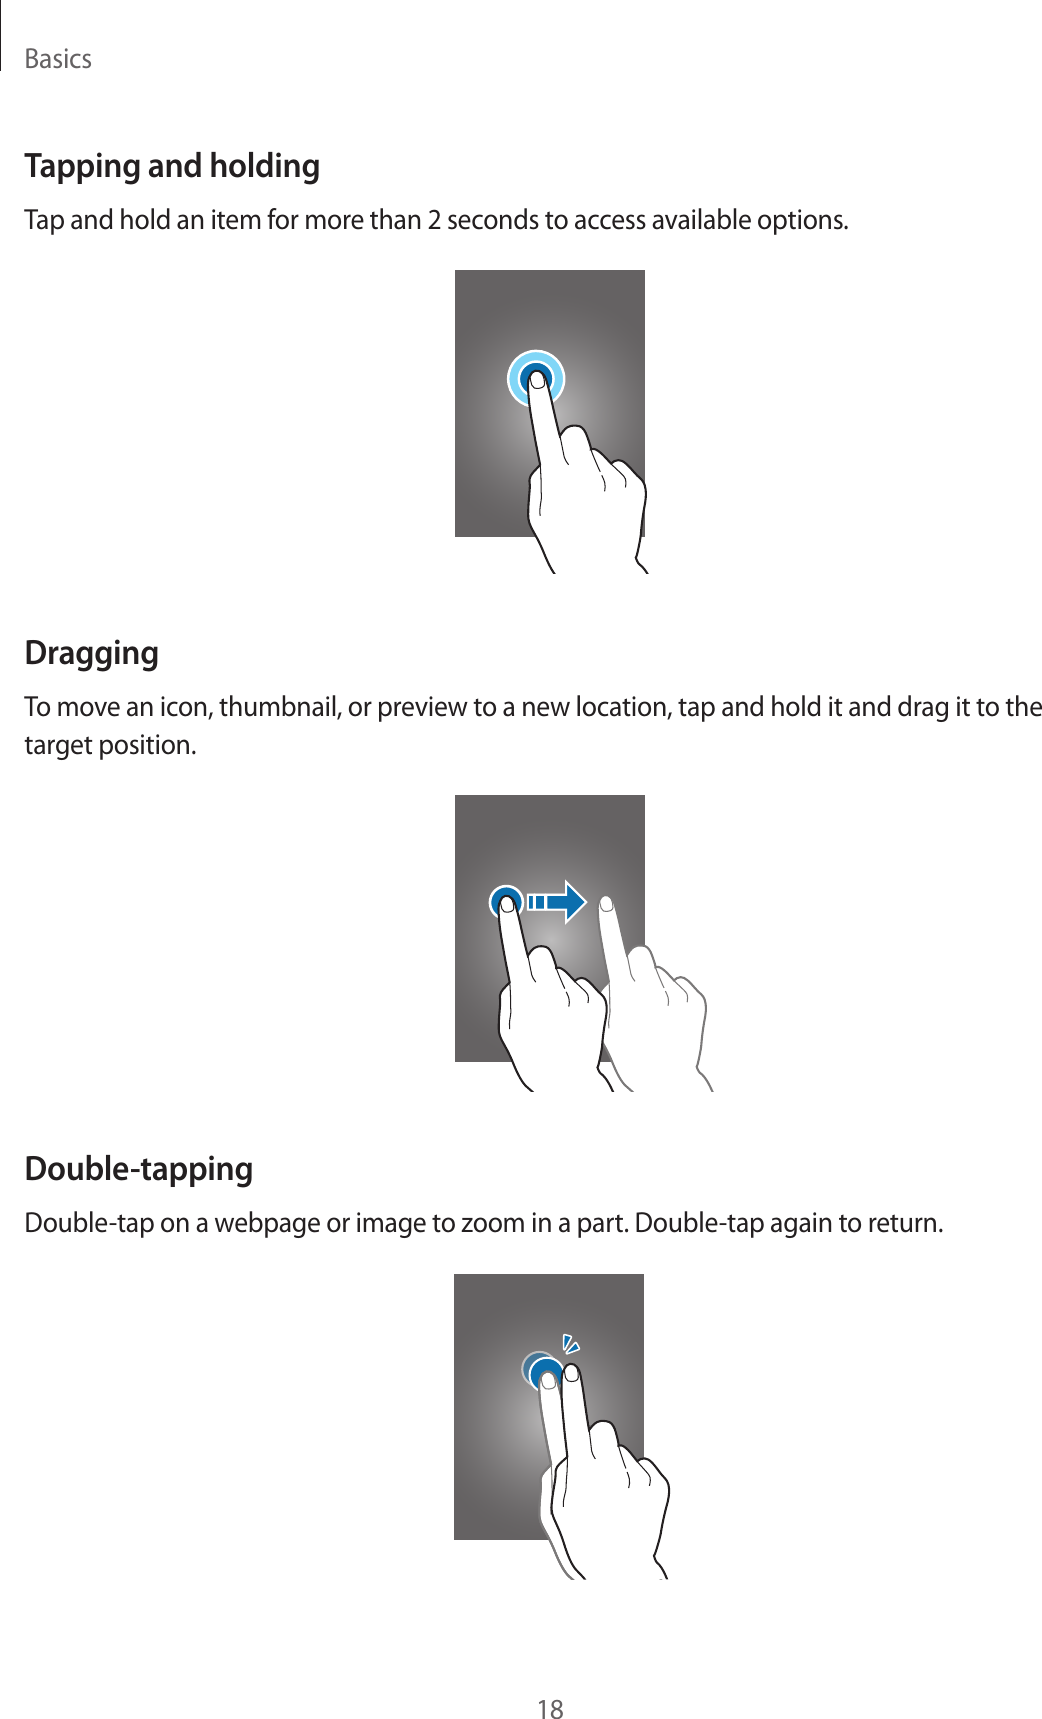 Basics18Tapping and holdingTap and hold an item for more than 2 seconds to access available options.DraggingTo move an icon, thumbnail, or preview to a new location, tap and hold it and drag it to the target position.Double-tappingDouble-tap on a webpage or image to zoom in a part. Double-tap again to return.